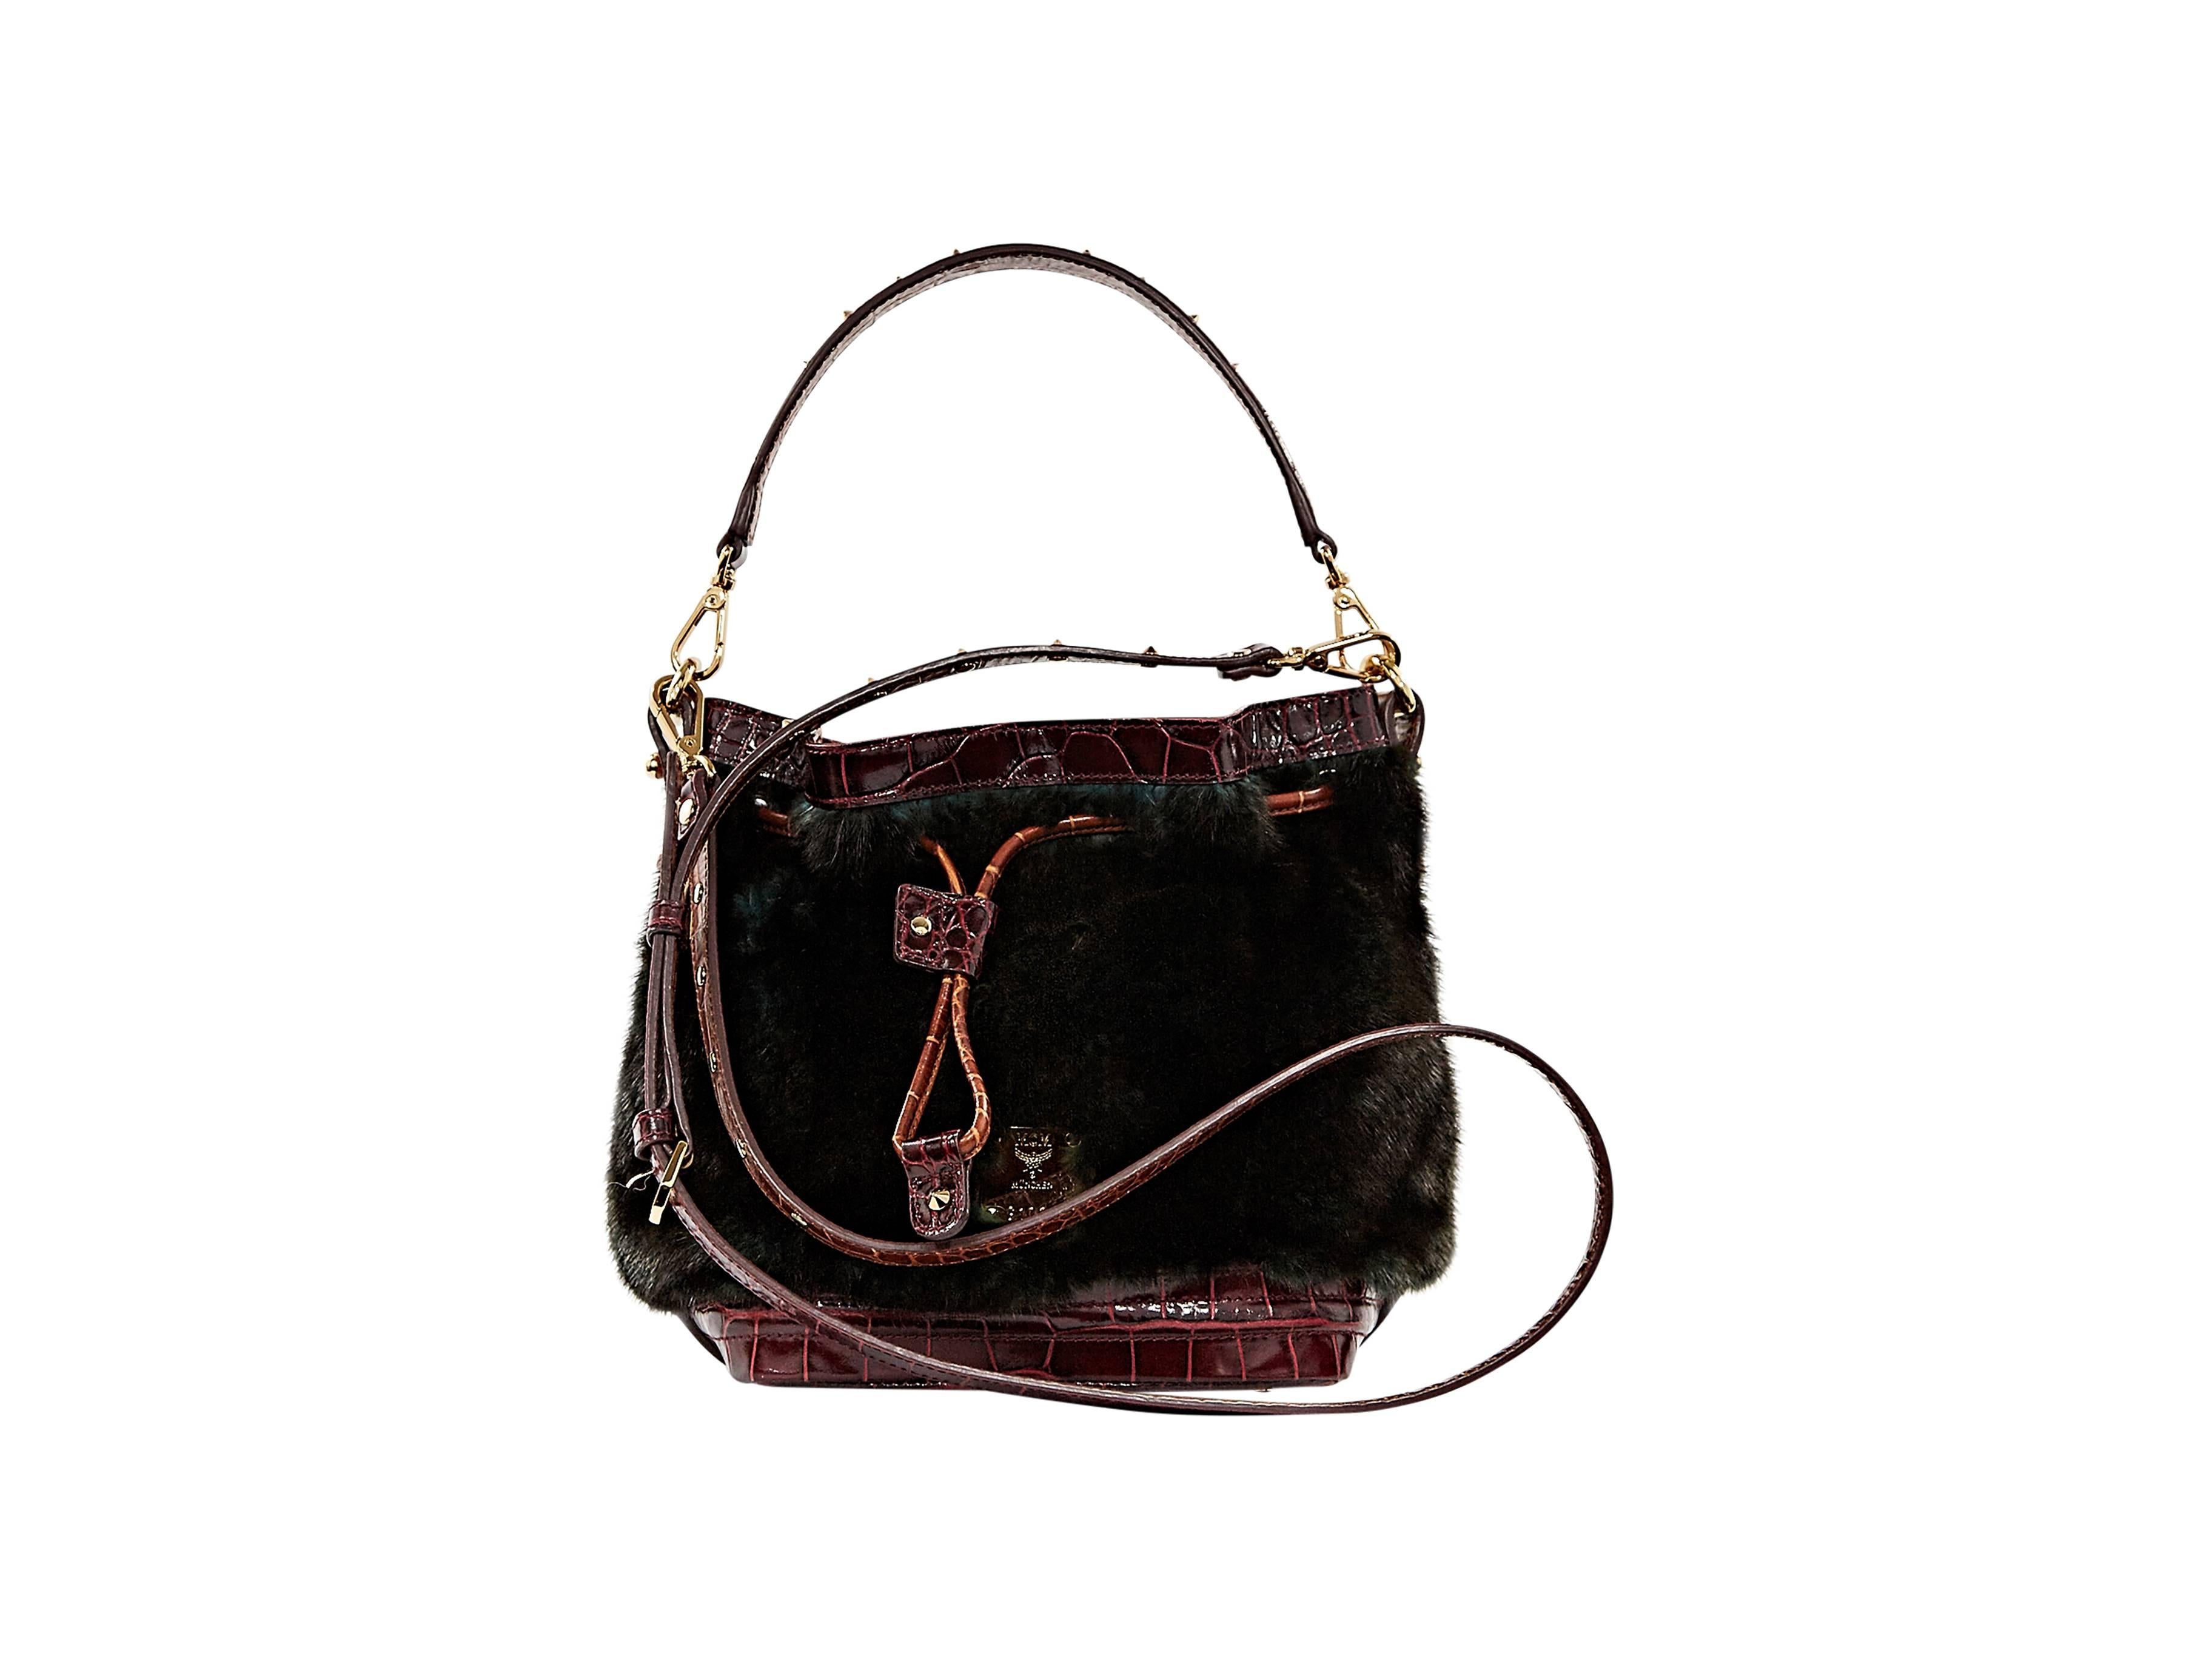 Dark green fur satchel with burgundy snake-embossed leather trim by MCM.  Removable studded top handle and shoulder strap. Drawstring accent.  Protective metal feet.  Goldtone hardware.